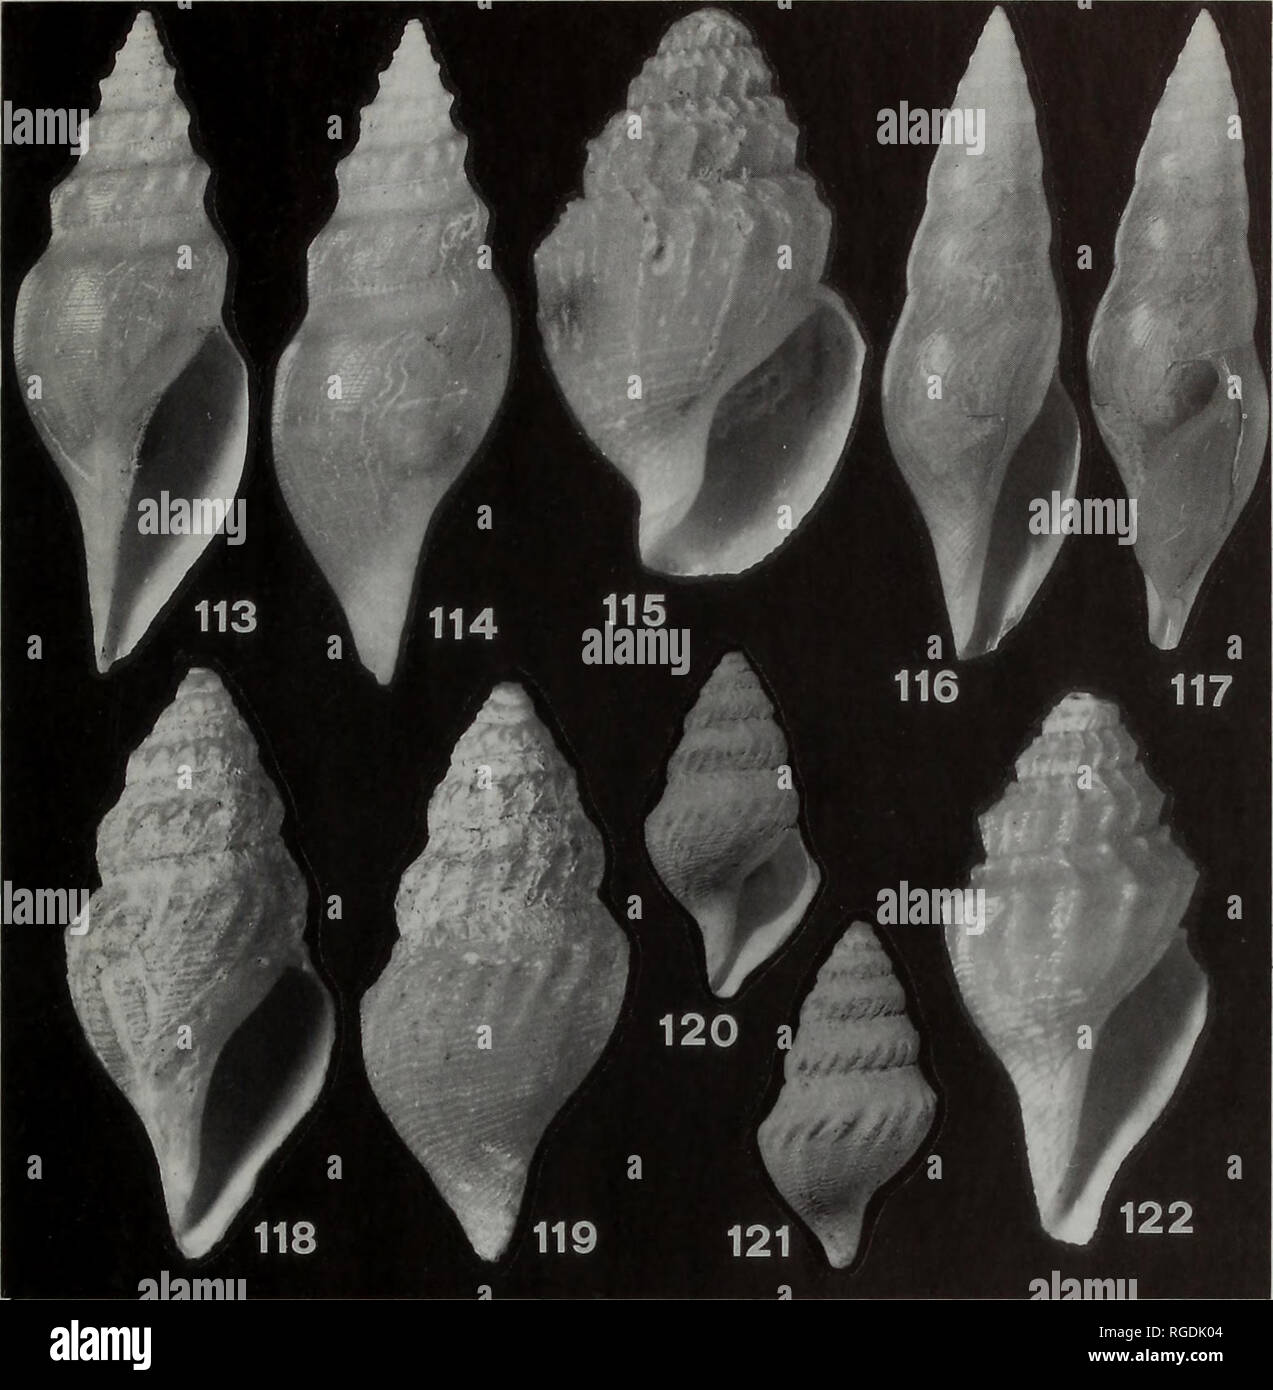 . Bulletin of the Natural History Museum Zoology. DEEP-SEA CONOIDEAN GASTROPODS 27. Figs 113-122 Daphnellinaeand Mangeliinae. 113,114- Gymnobela (Theta) daphnelloides (Dall, 1895), stn 118, H = 27.0; 115- Mioawateria exten- saeformis (Schepman, 1913), stn 26, H = 9.9 mm; 116,117 Xanthodaphne maldivica Sysoev, new species, holotype; 118-121 - Benthomangelia brachytona (Watson, 1881), stn 119, H = 17.1 mm (118,119) and lectotype, BM(NH) 1887.2.9.1034, H = 15.1 mm (120,121); 122 - B. trophonoidea Thiele, 1925, stn 185, H = 10.0mm. latter, in its turn, is too poorly distinguished from Gymnobela to Stock Photo